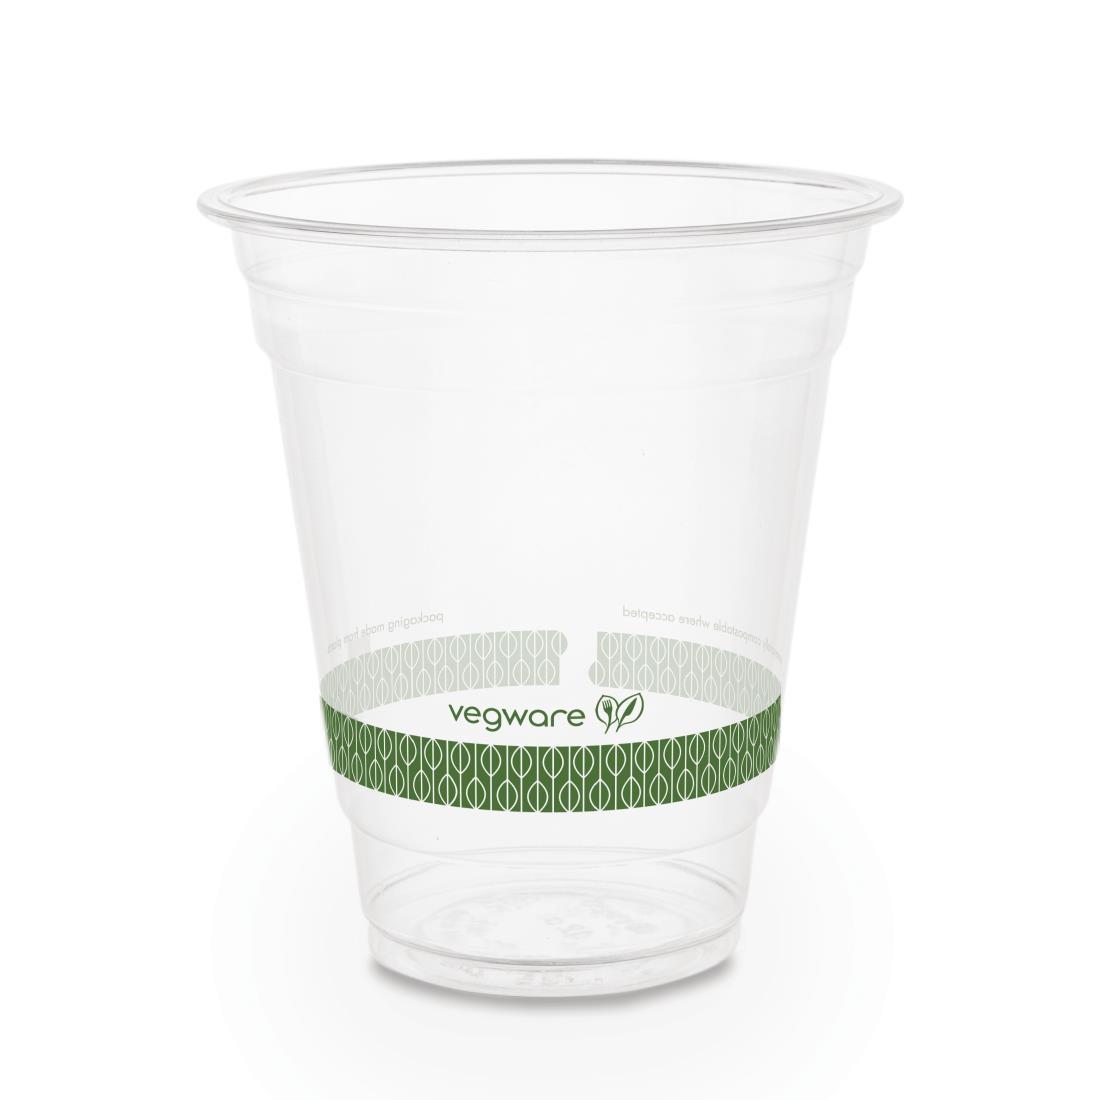 Vegware Compostable PLA Cold Cups 340ml / 12oz (Pack of 1000) - GH014  - 1